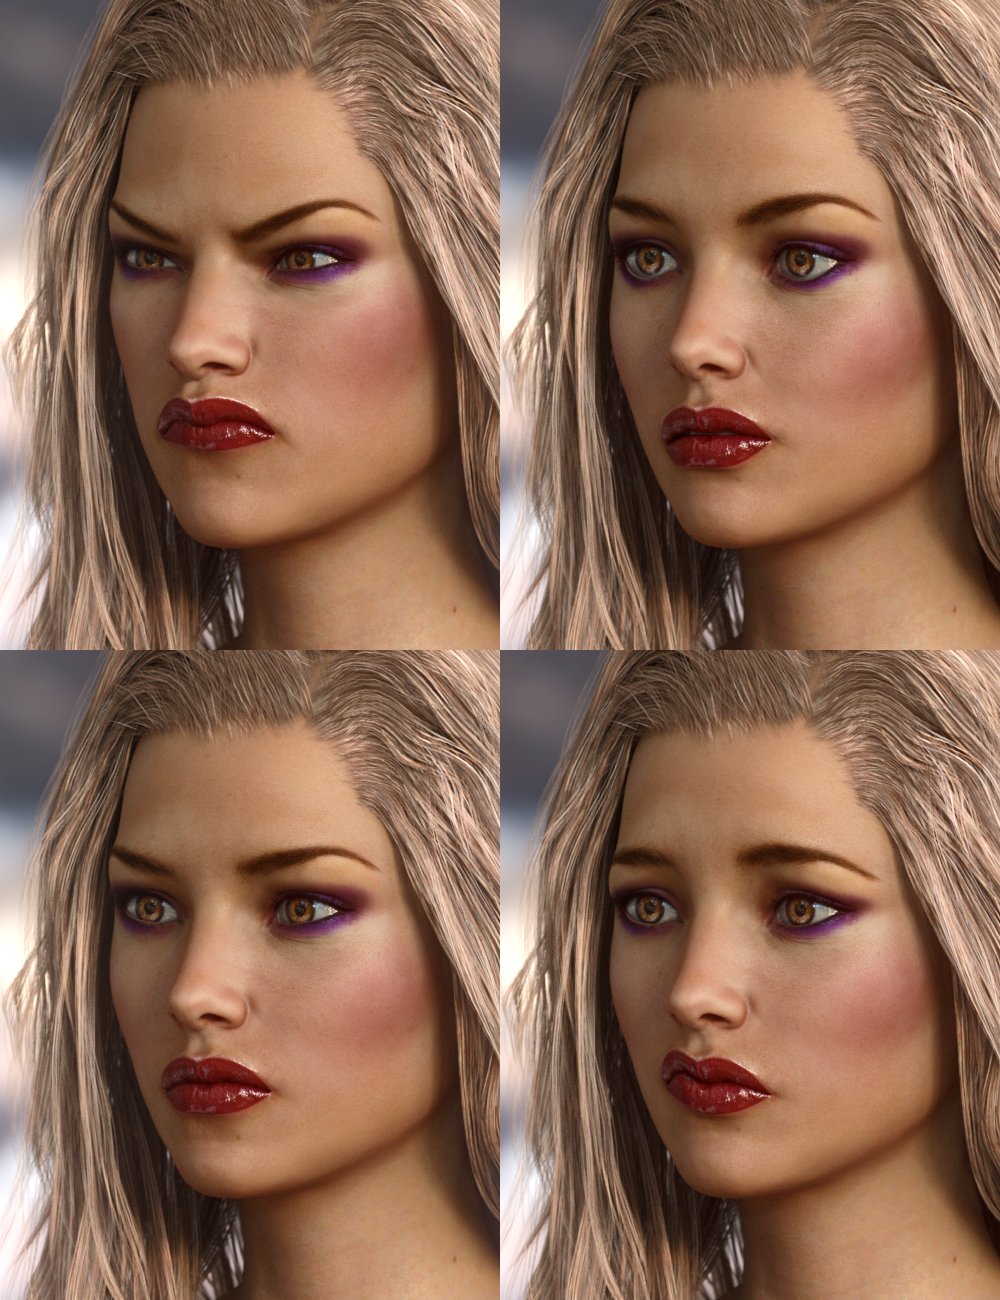 Victoria 7 Extreme Expressions by: 3DCelebrity, 3D Models by Daz 3D